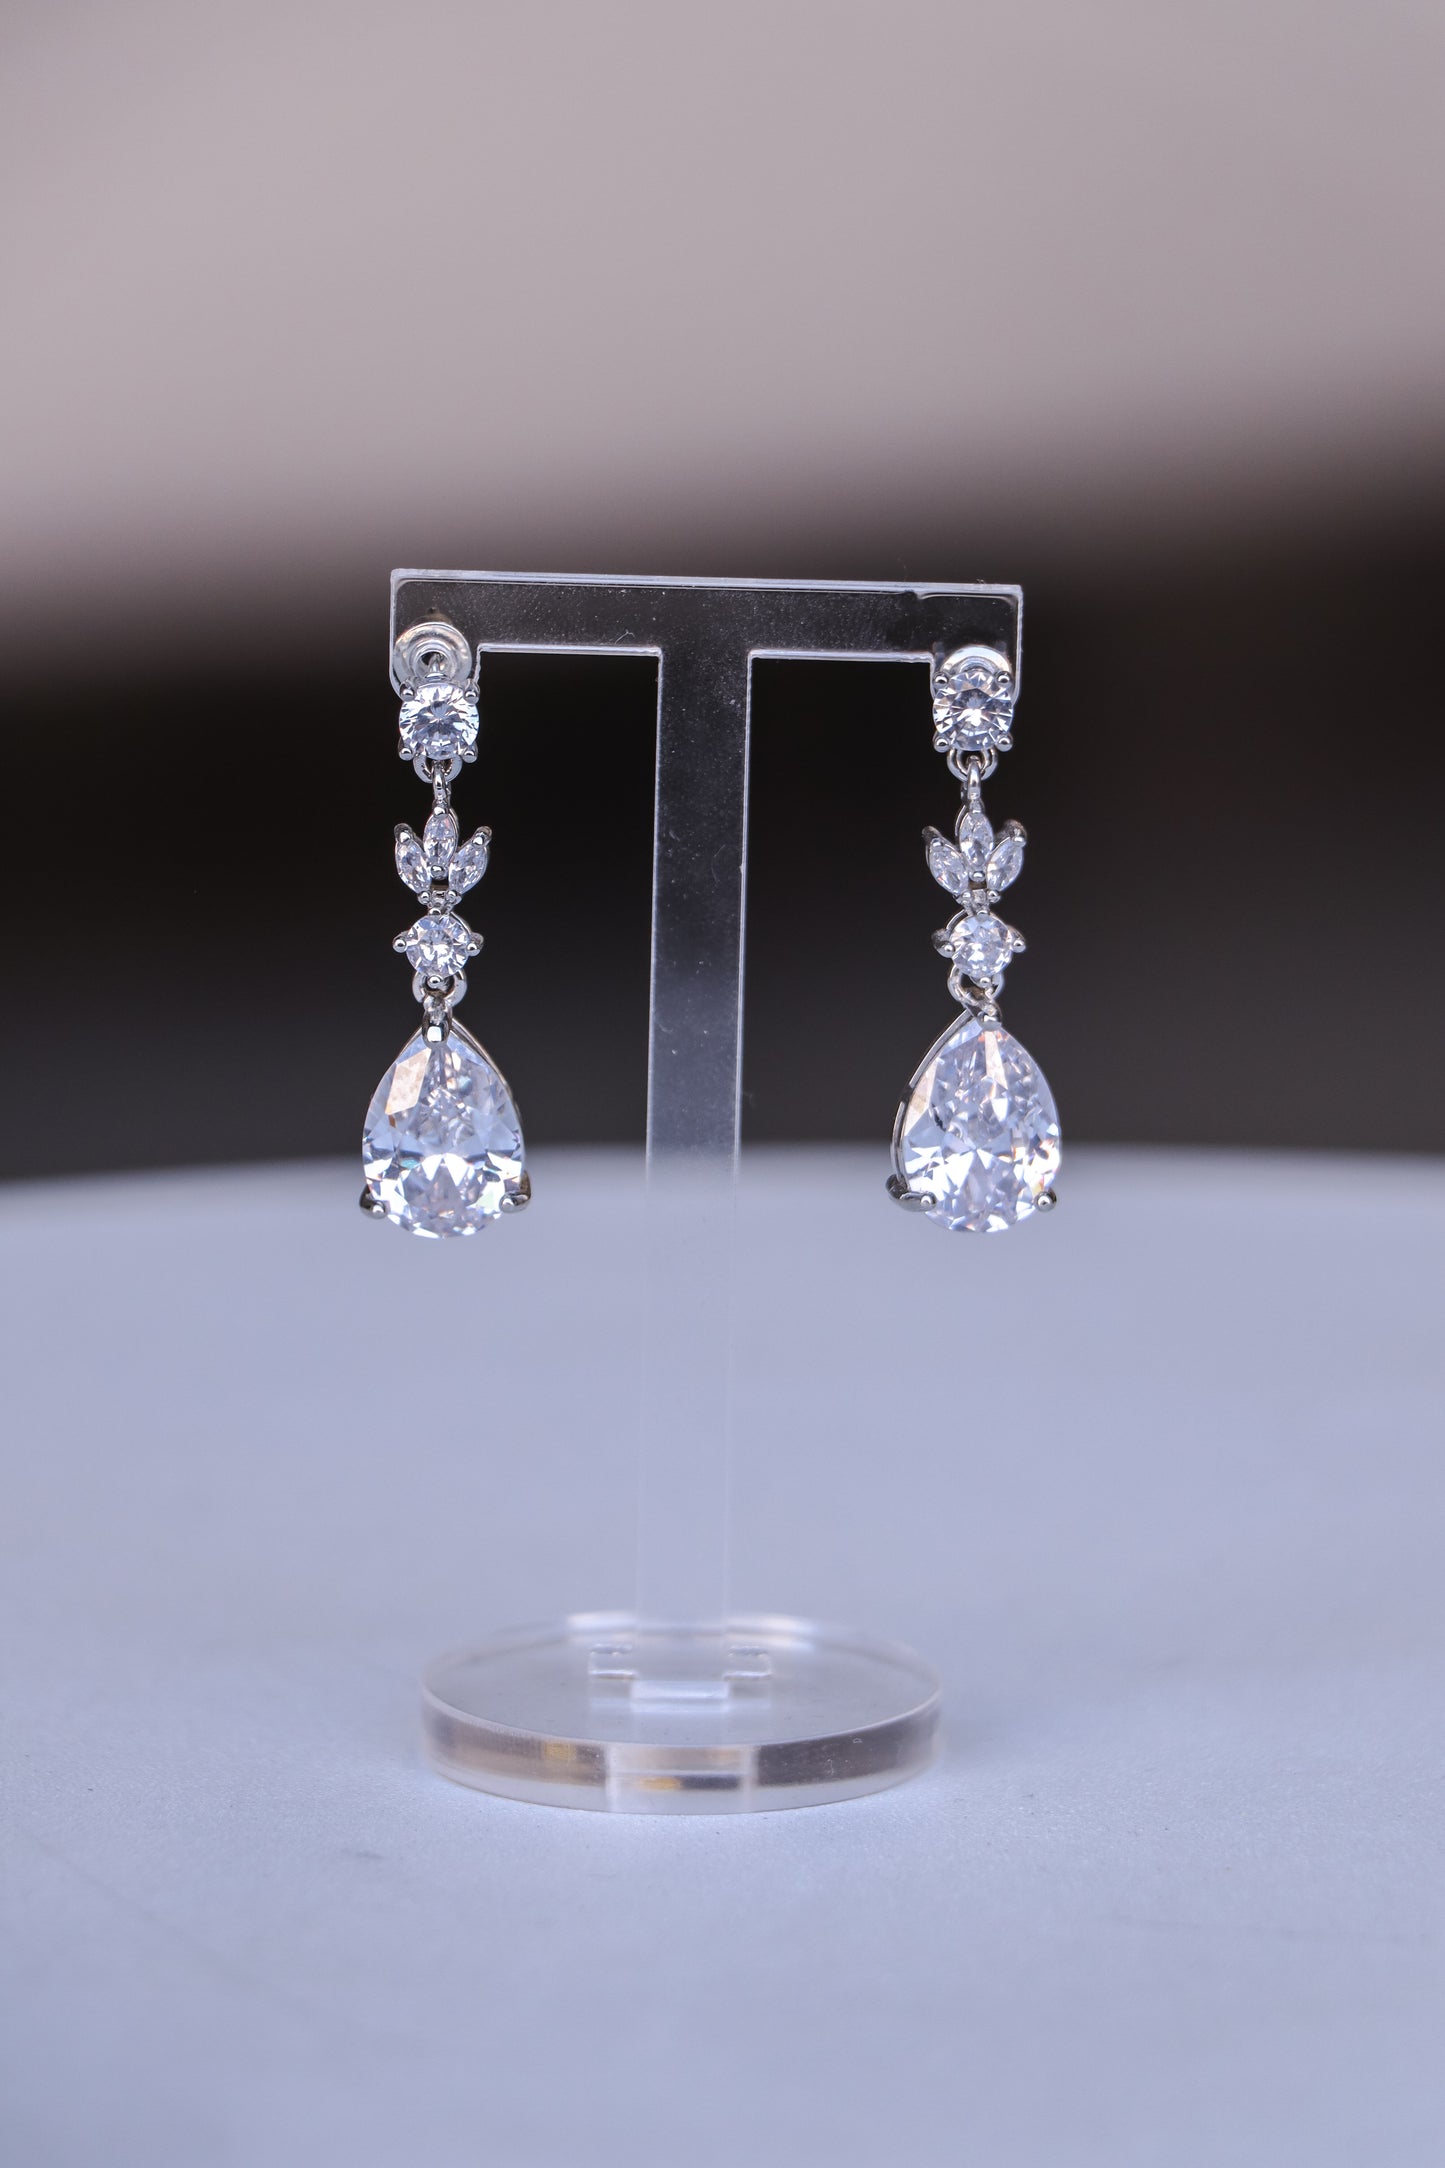 Pair of elegant Cassia earrings with intricate design and sparkling gemstones